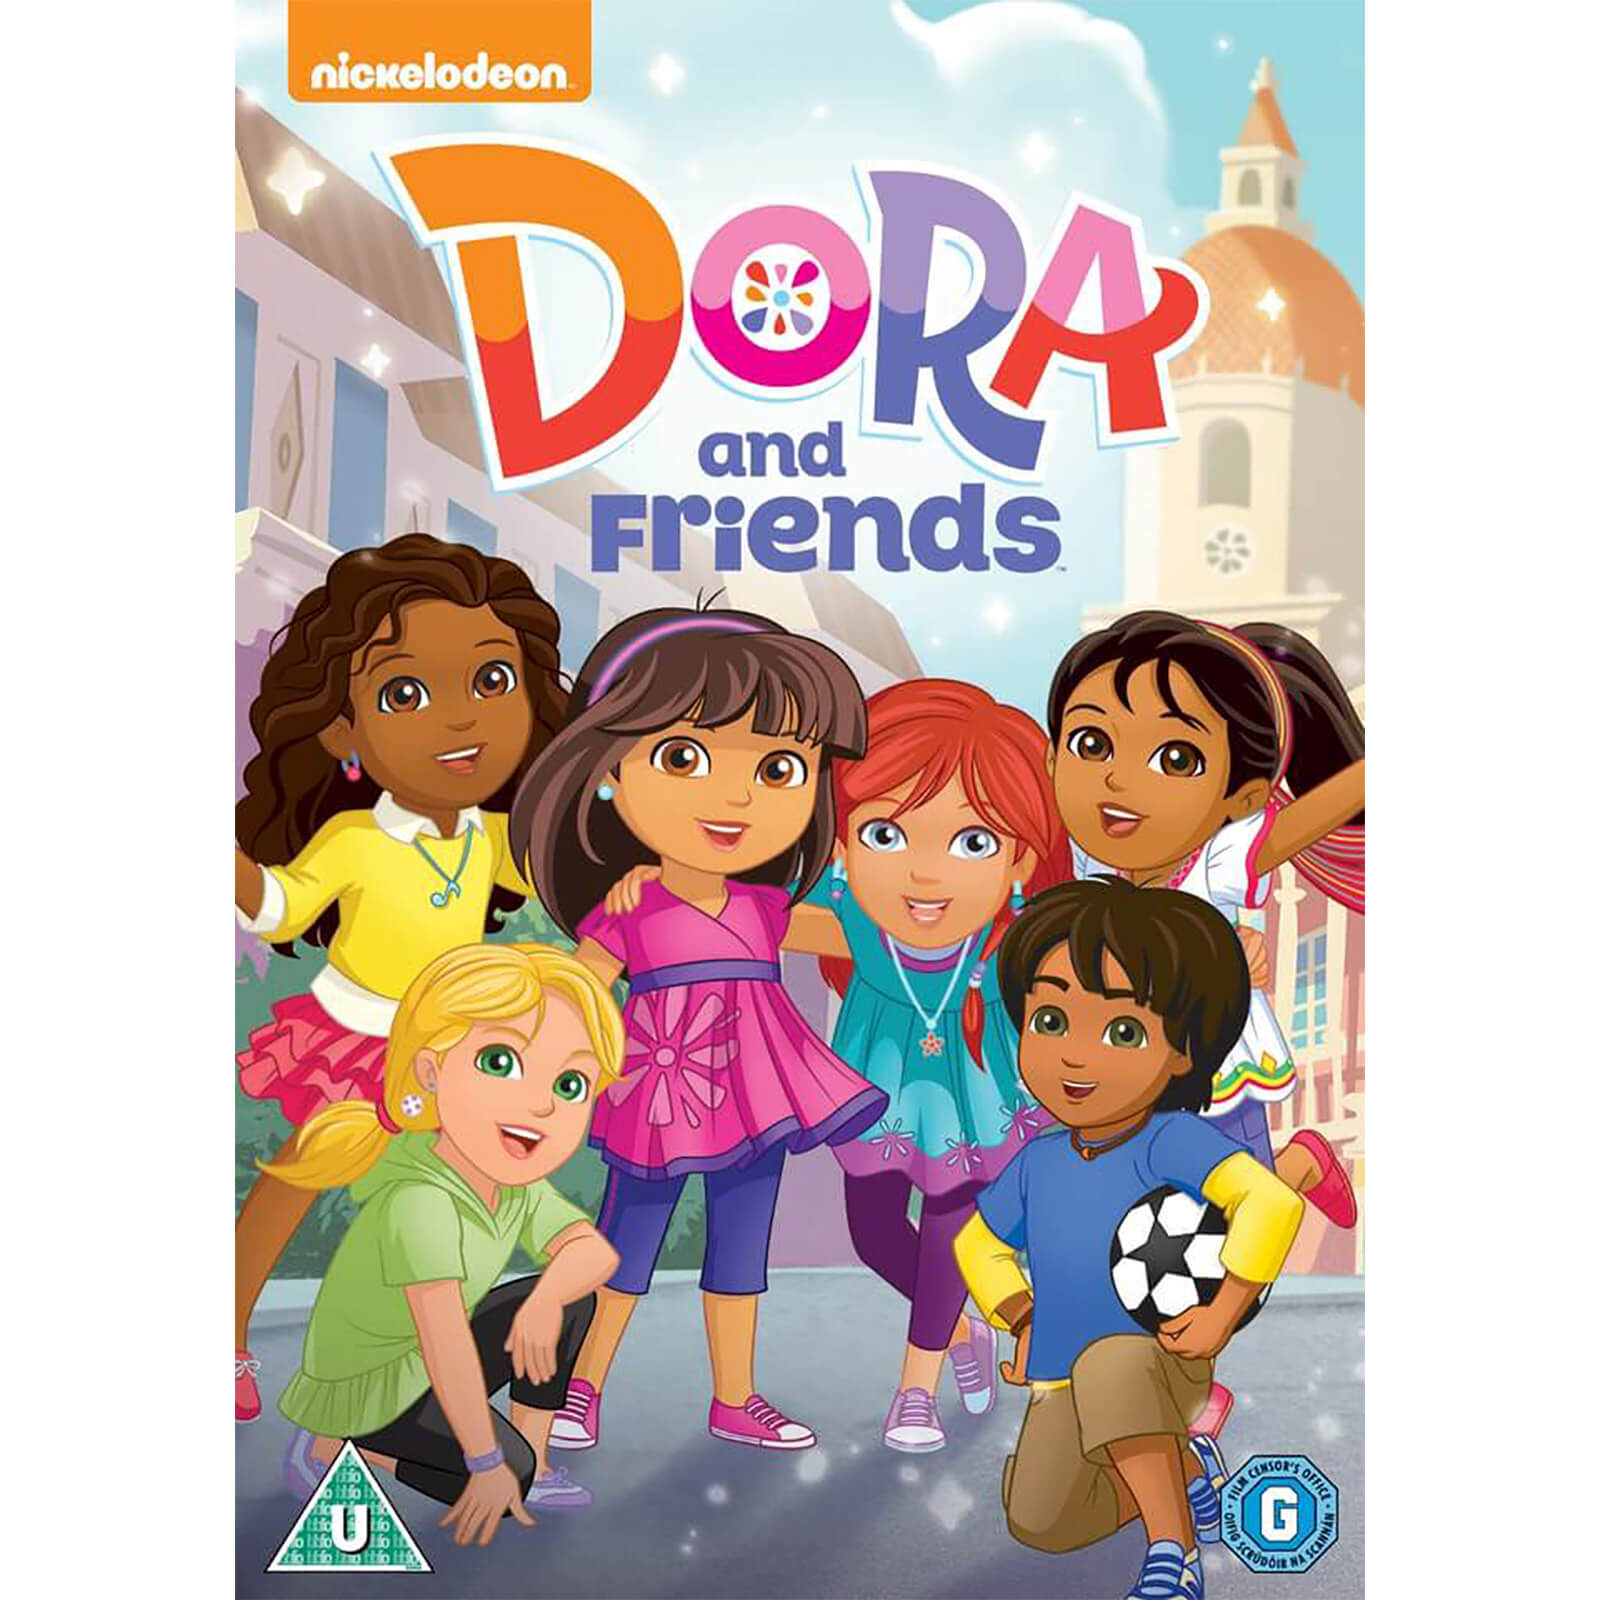 More like "Dora And Friends - We Have A Pirate Ship / Royal Ball / Mag...